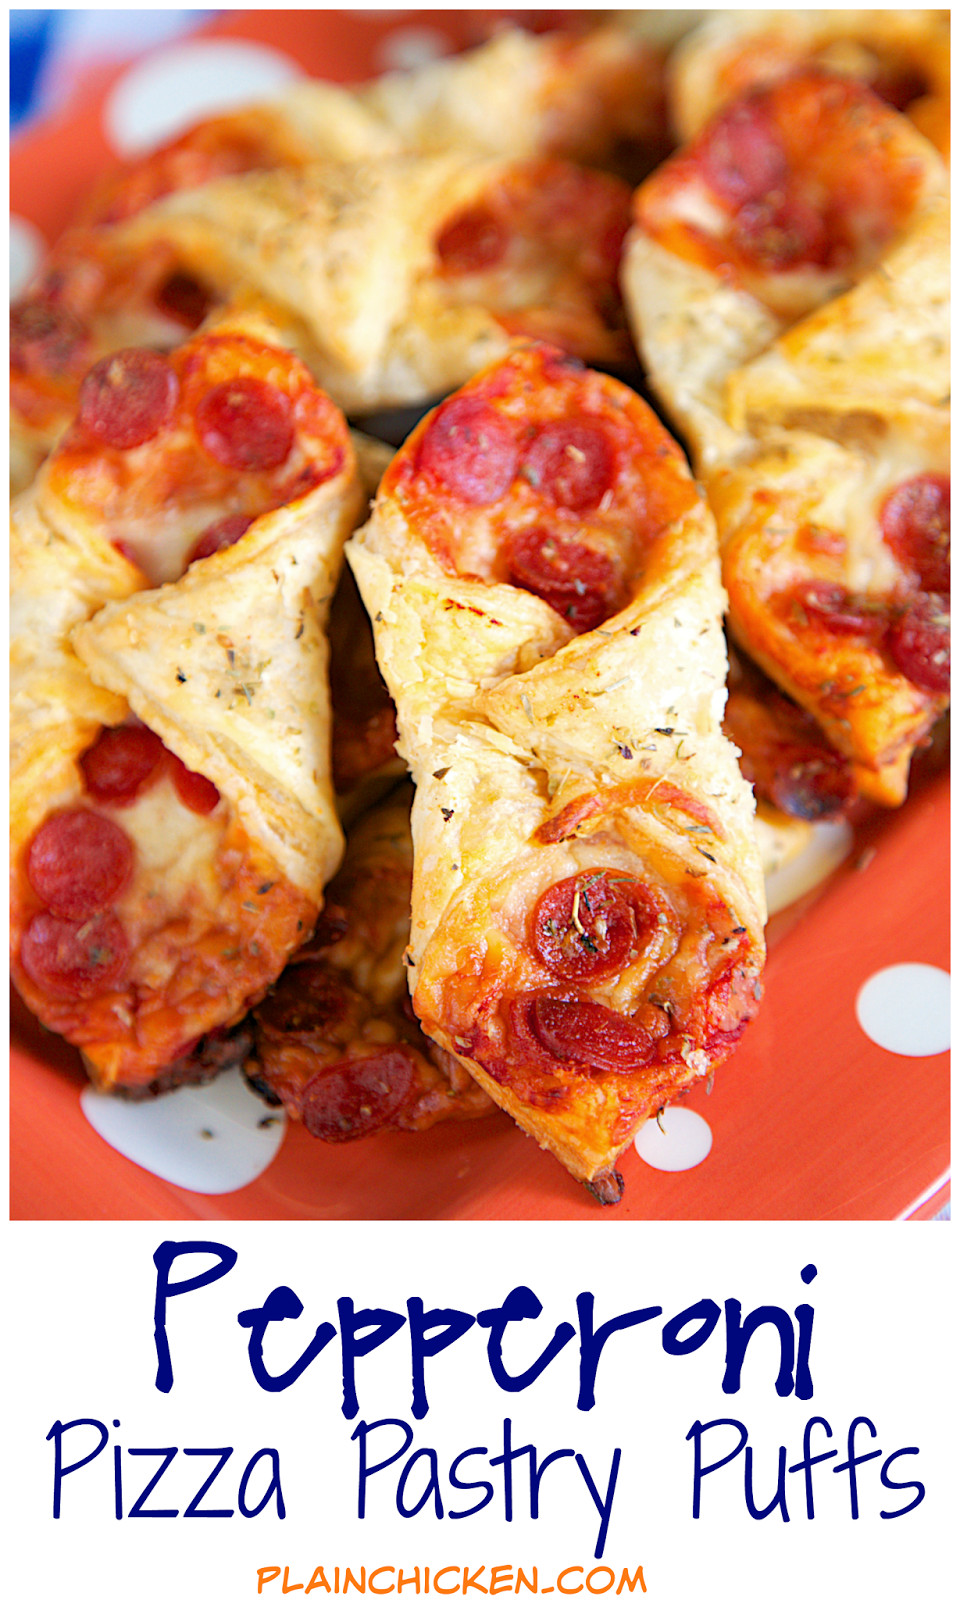 Appetizers With Puff Pastry Sheets
 Best 25 Puff pastry sheets ideas on Pinterest